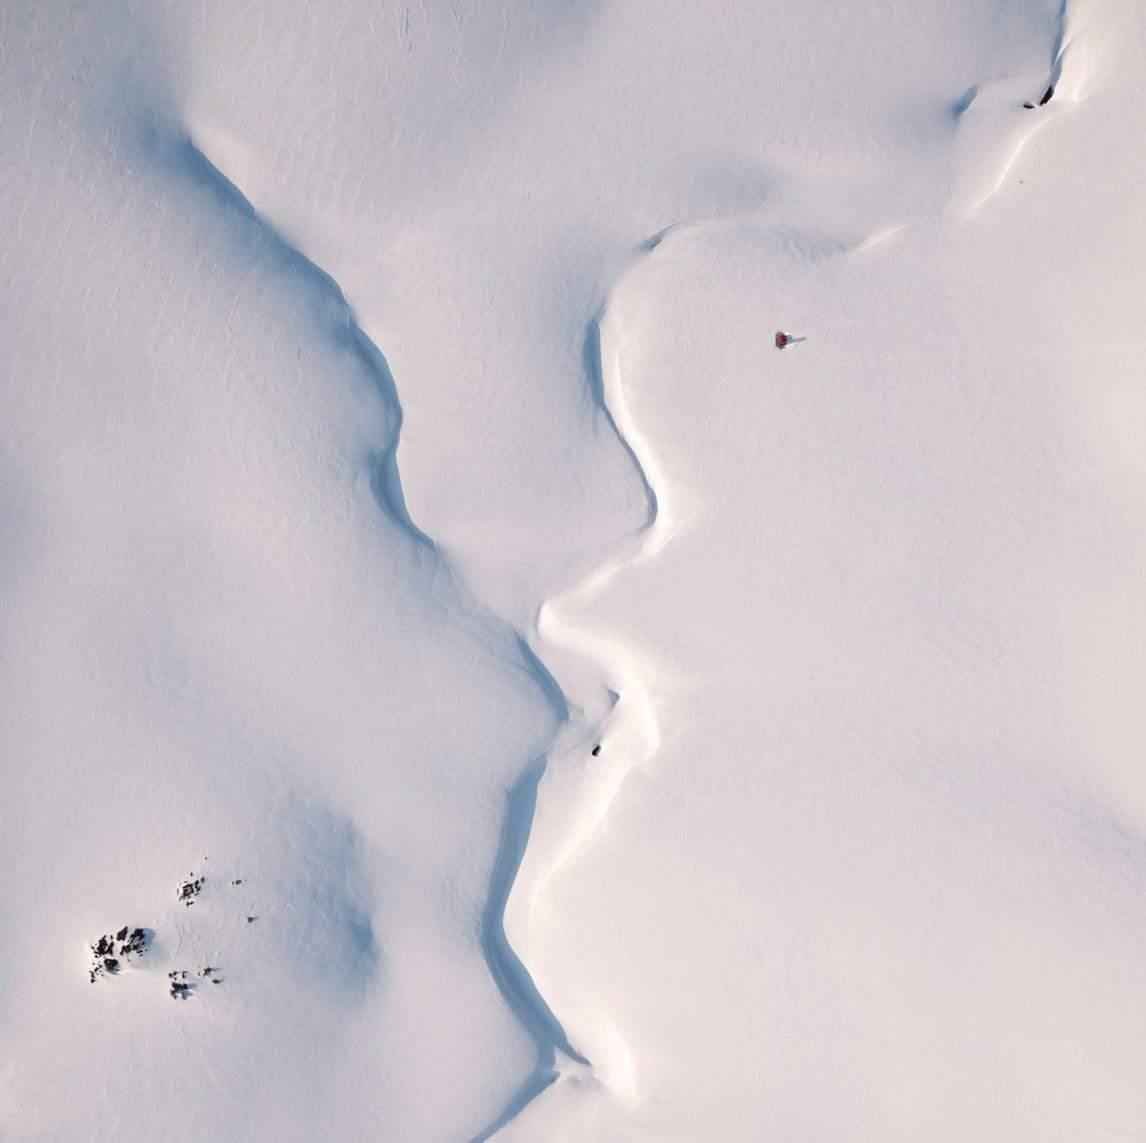 An aerial view of a snow-covered area forming a convergence in the middle, and some small black spots in the left bottom corner, Convergence - Snowy Mountains New South Wales    